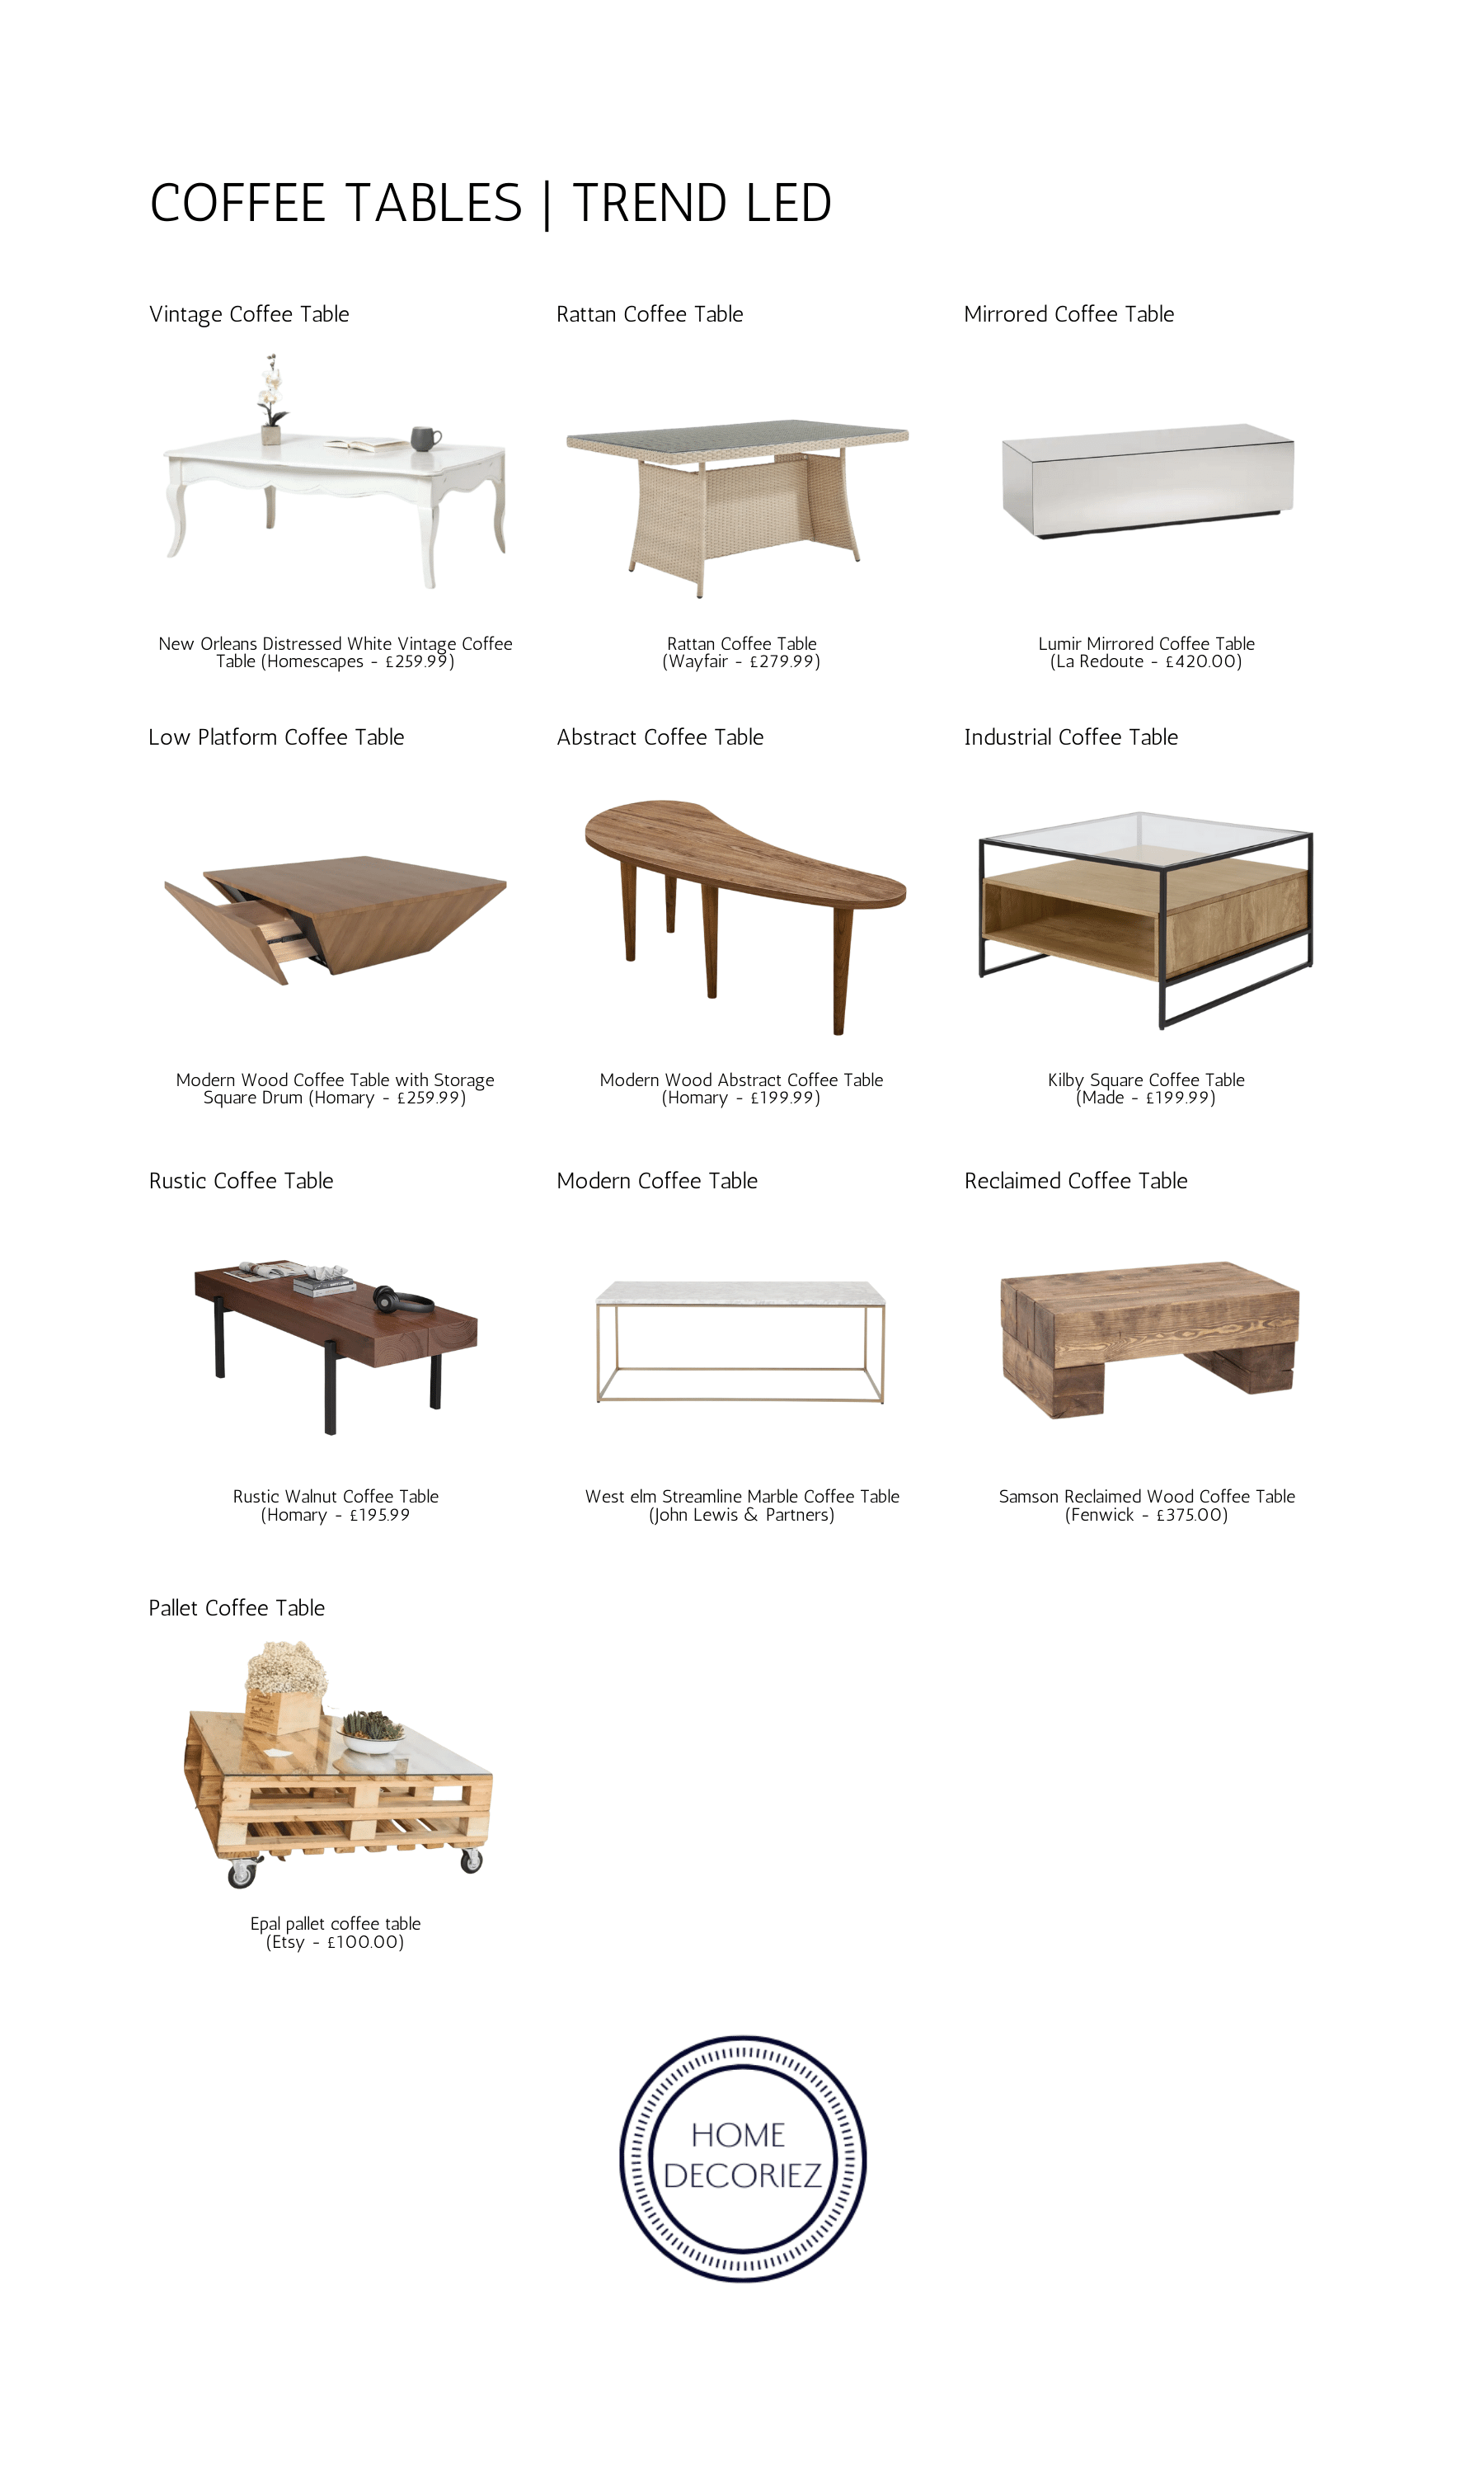 Trend LED coffee table types infographic